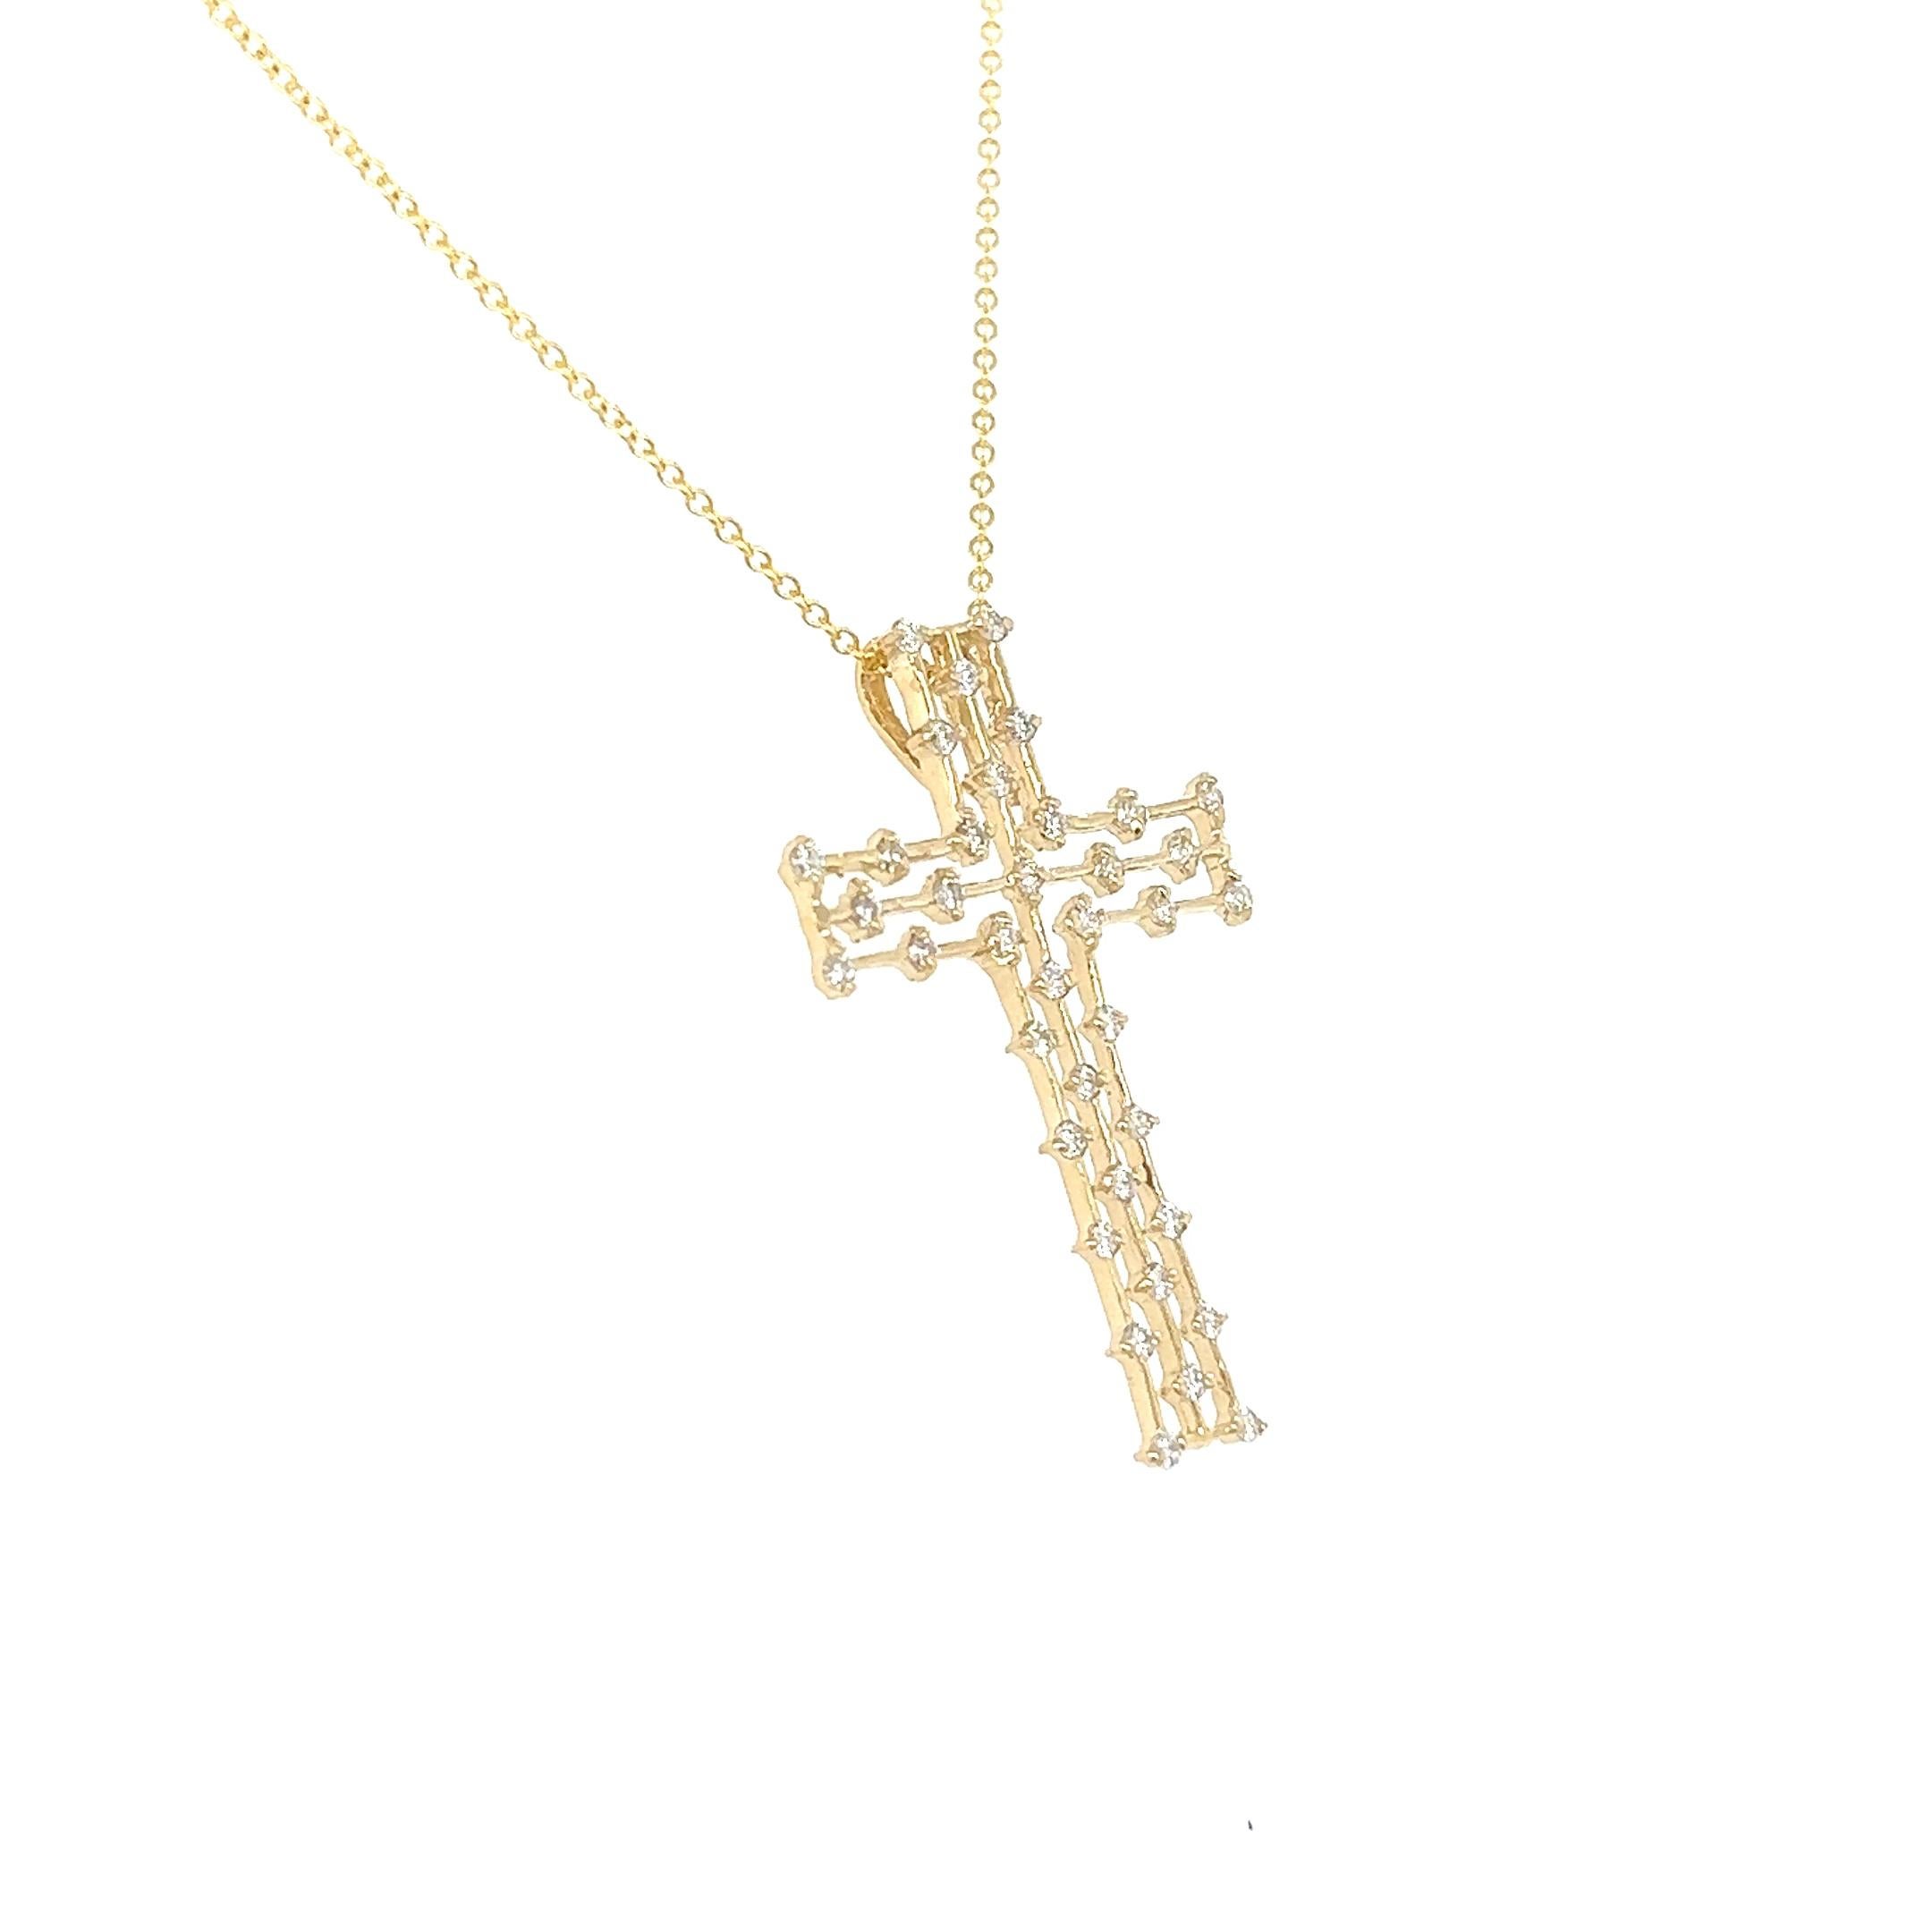 This beautiful cross pendant has 0.40 carats of Natural Round Cut Diamonds with a clarity and color of VS-H. 

The pendant and chain has an approximate weight of 3.0 grams and is curated in 14 Karat Yellow Gold. 

The length of the chain pendant is